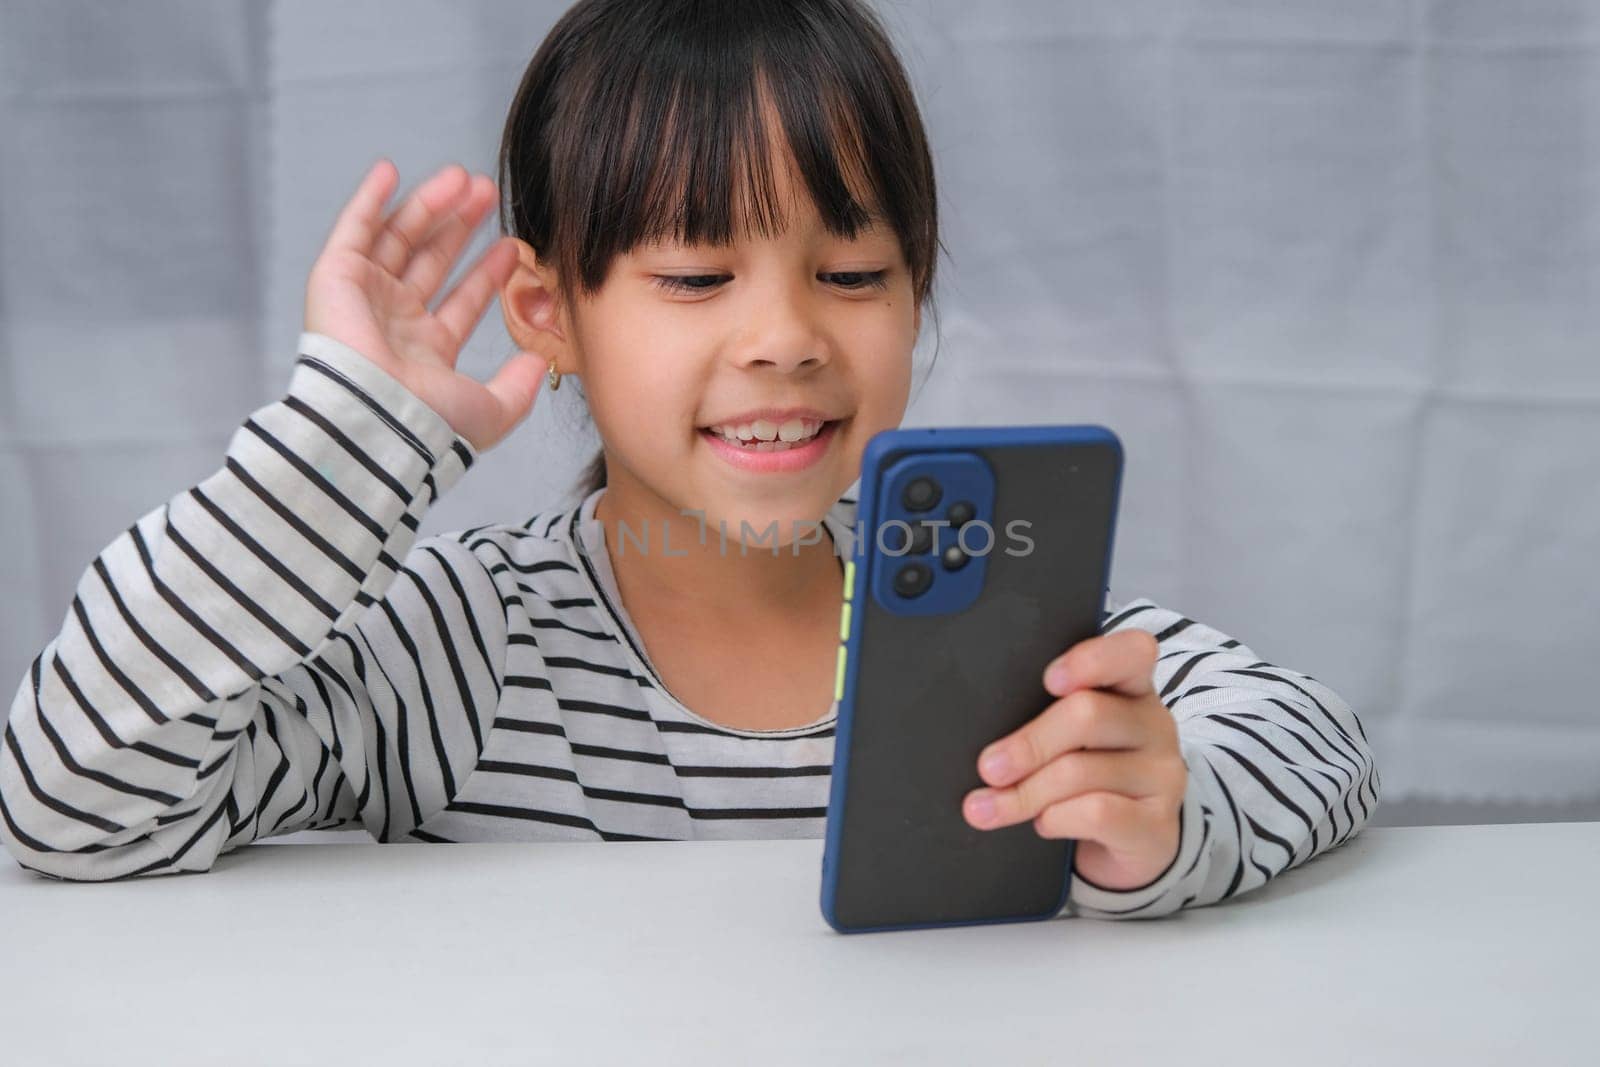 Cute little girl using smartphone and smiling while sitting at table in house. Happy Asian girl holding phone in hands, online learning or homeschooling, listening to music or playing games.